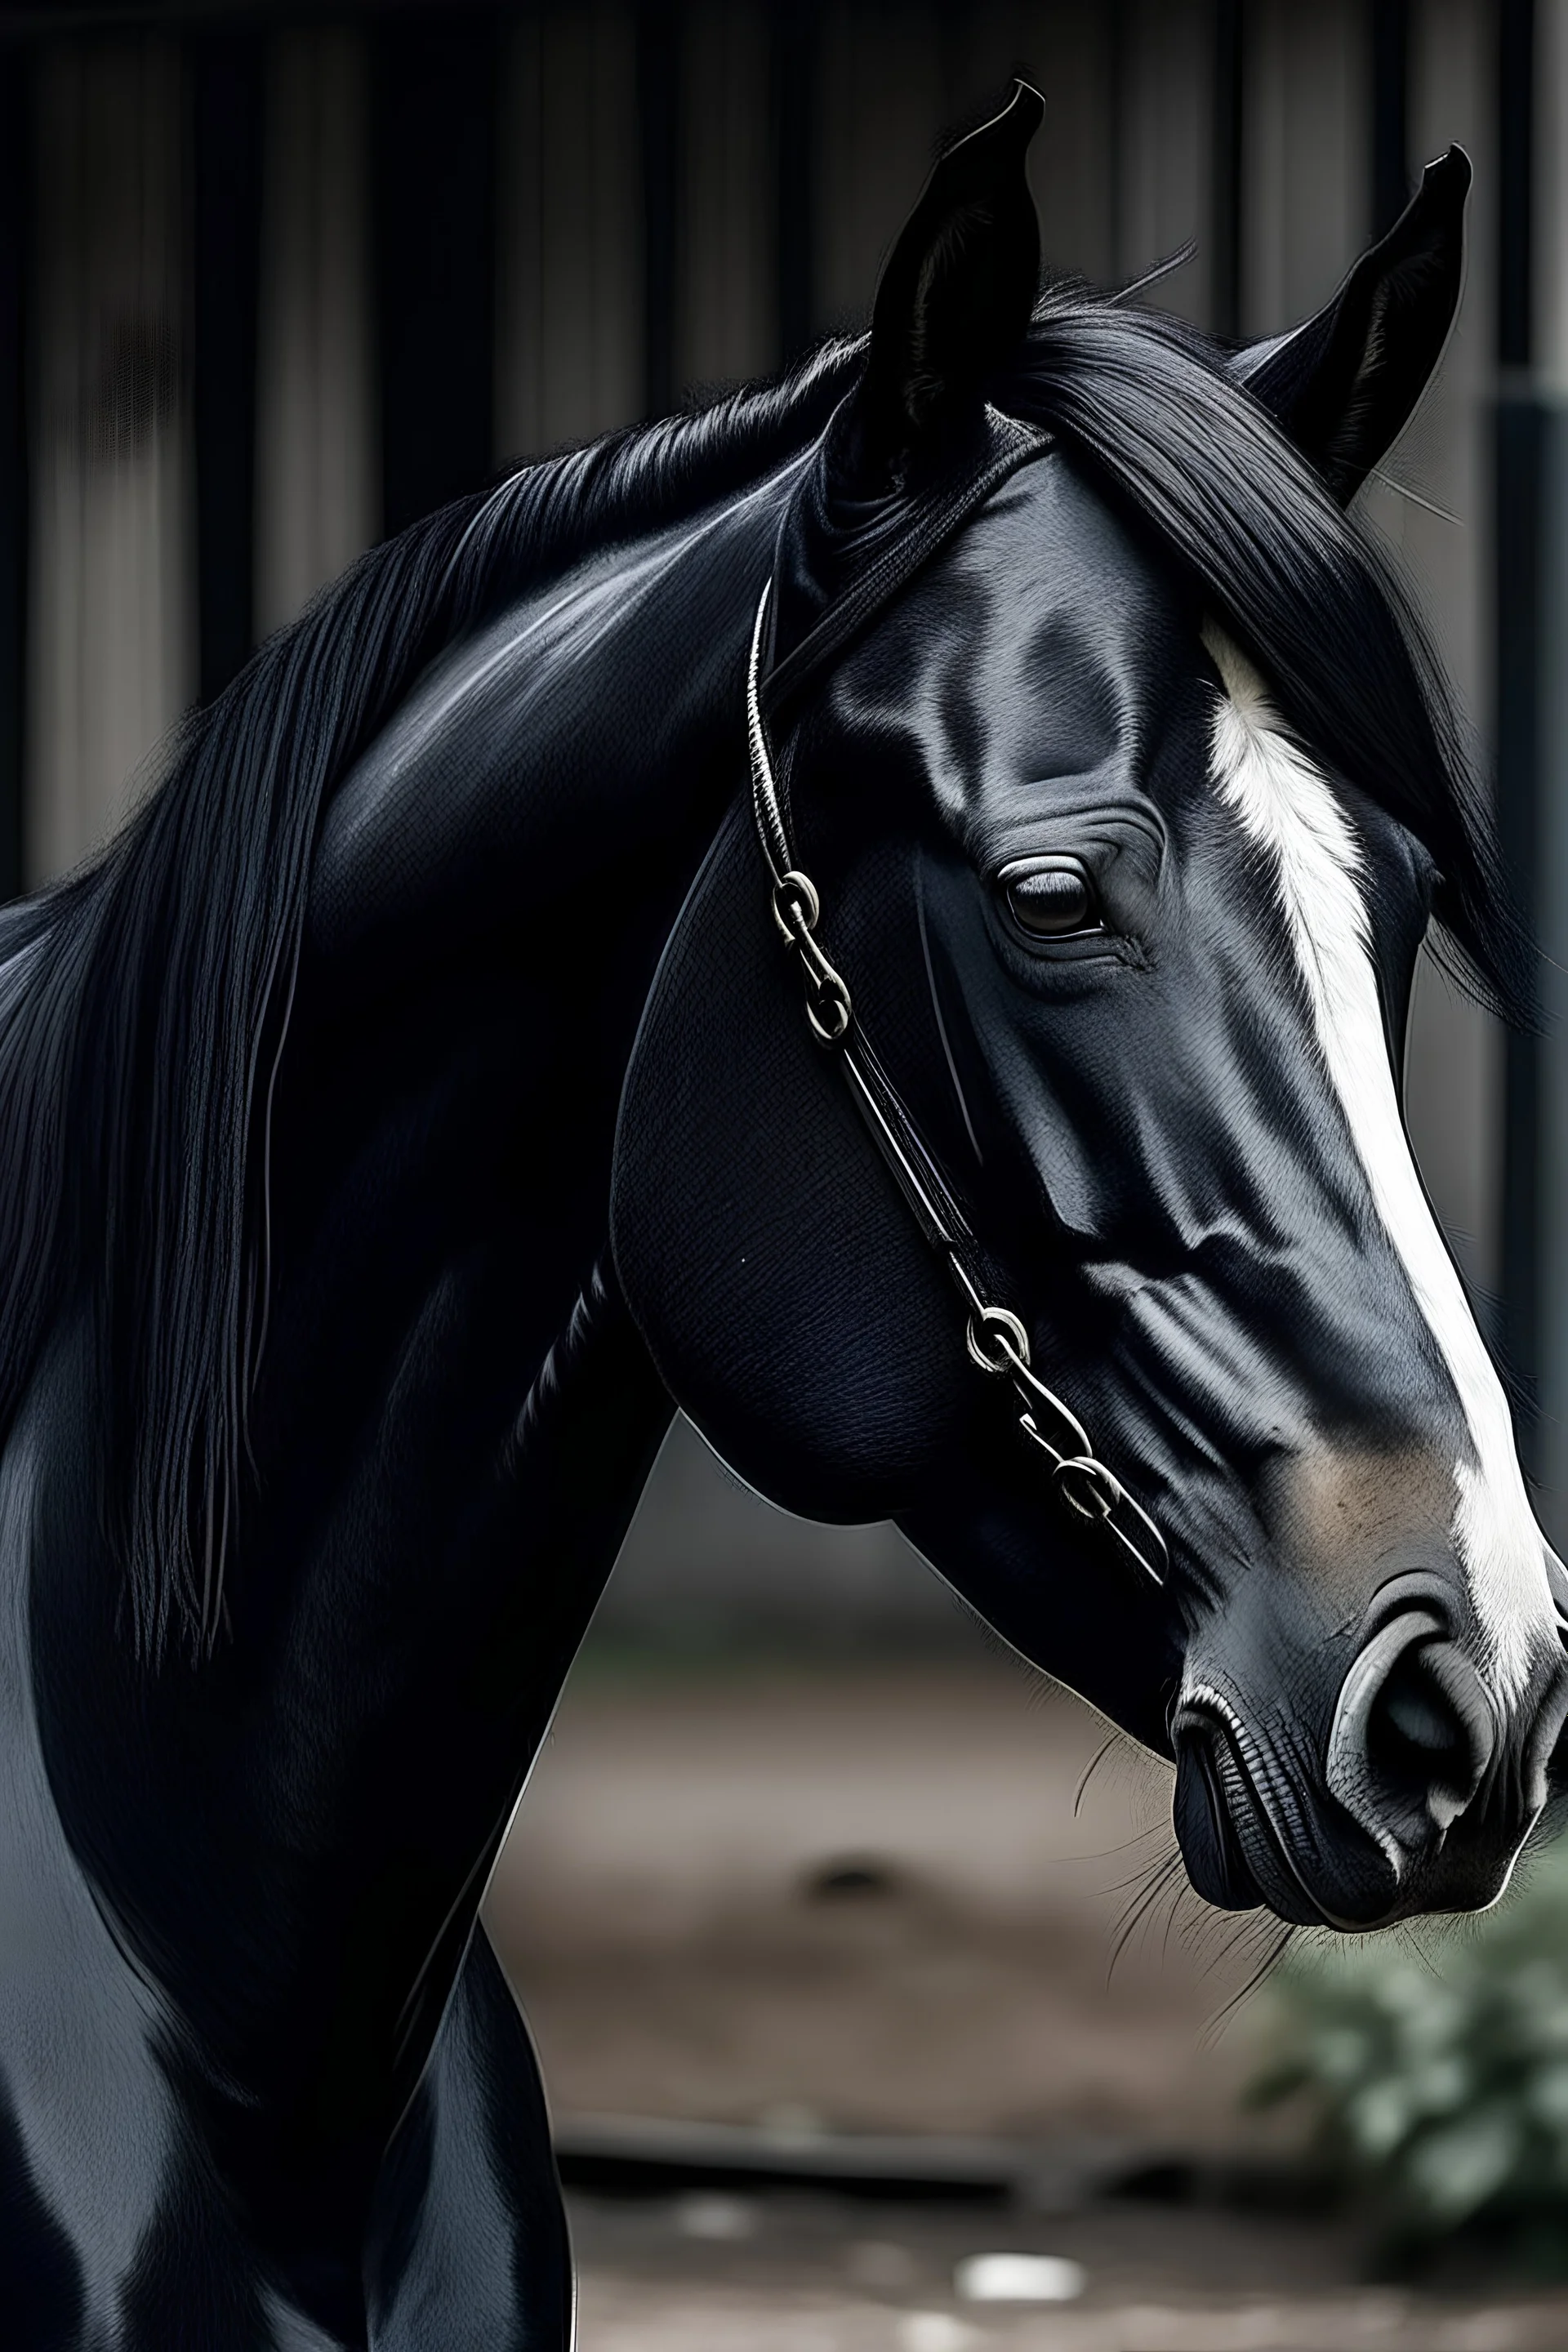 A black horse with a white mark